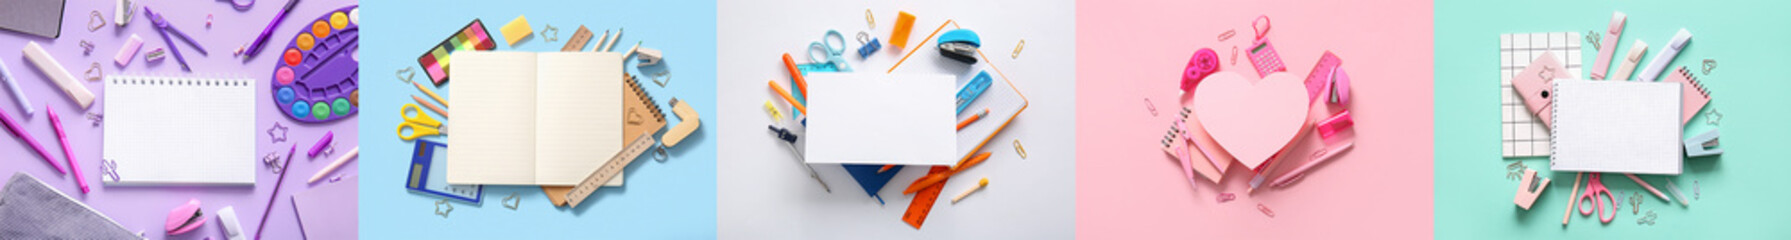 Collage with many school supplies on color background, top view